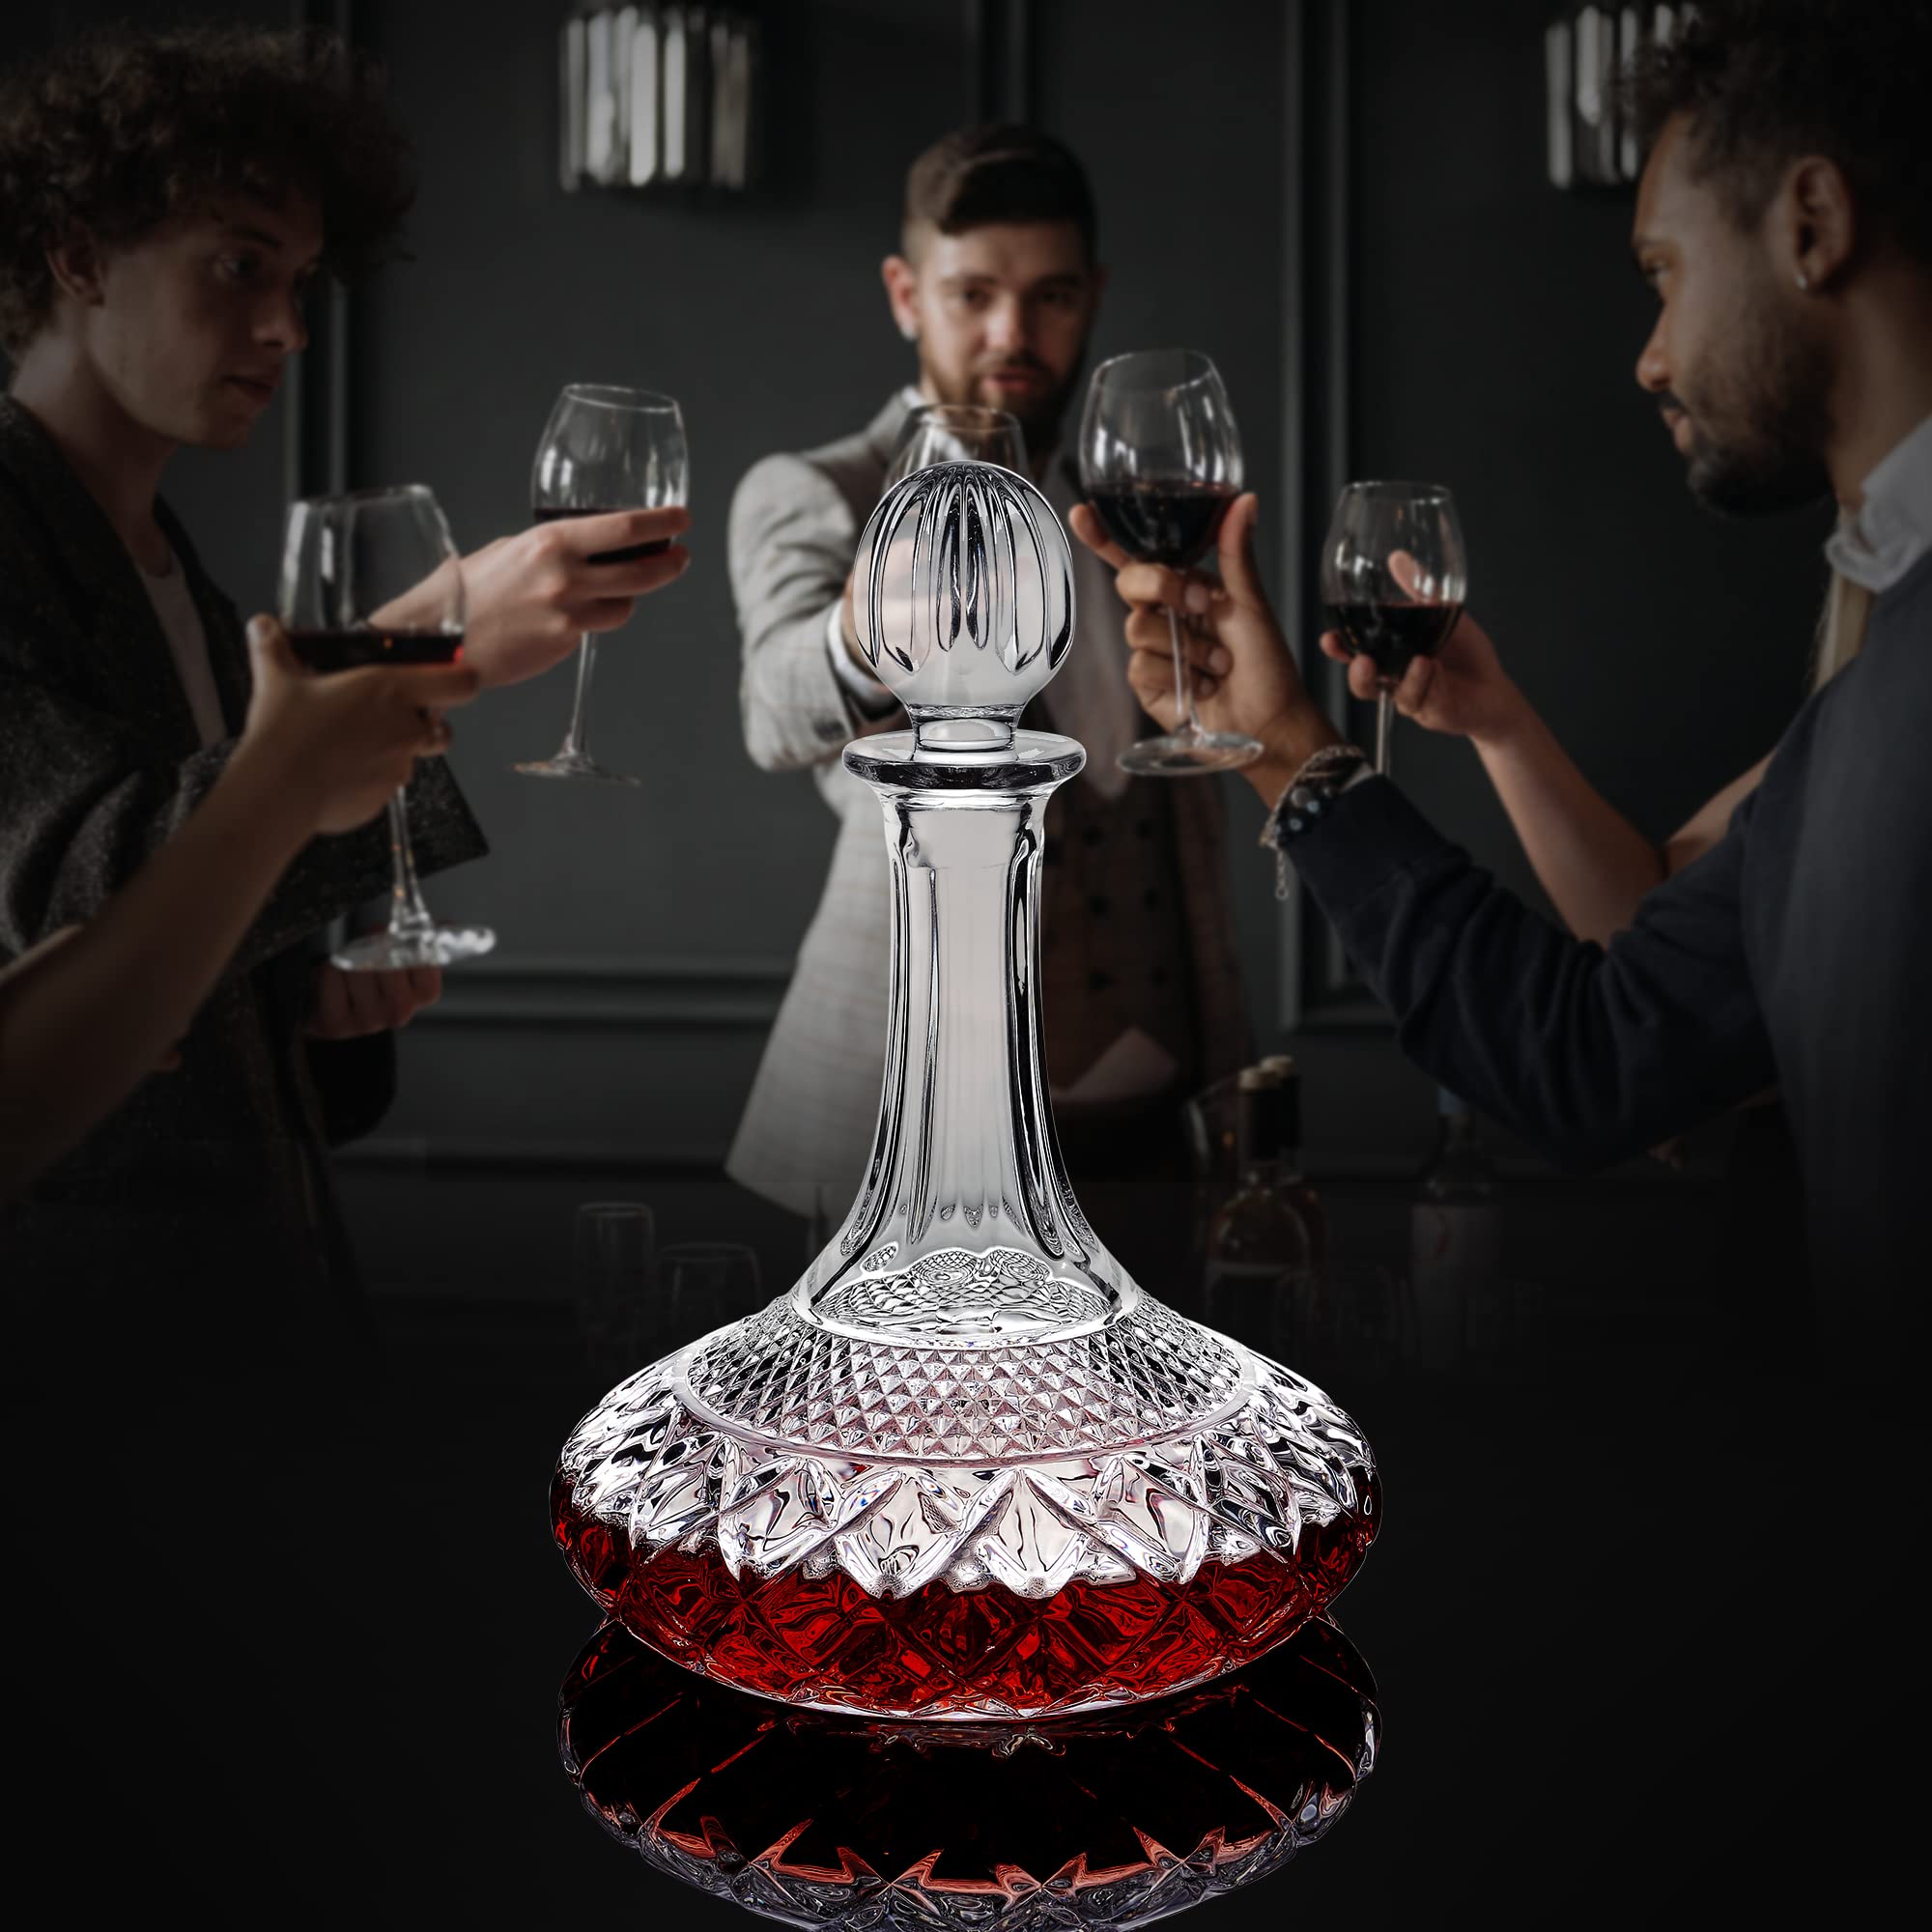 Paysky 50oz Wine Decanter Crystal Bottle for Wine with Stopper- Top Red Wine Decanter Carafe Bottle with Luxury Box .Elegant Gift for Men/Women